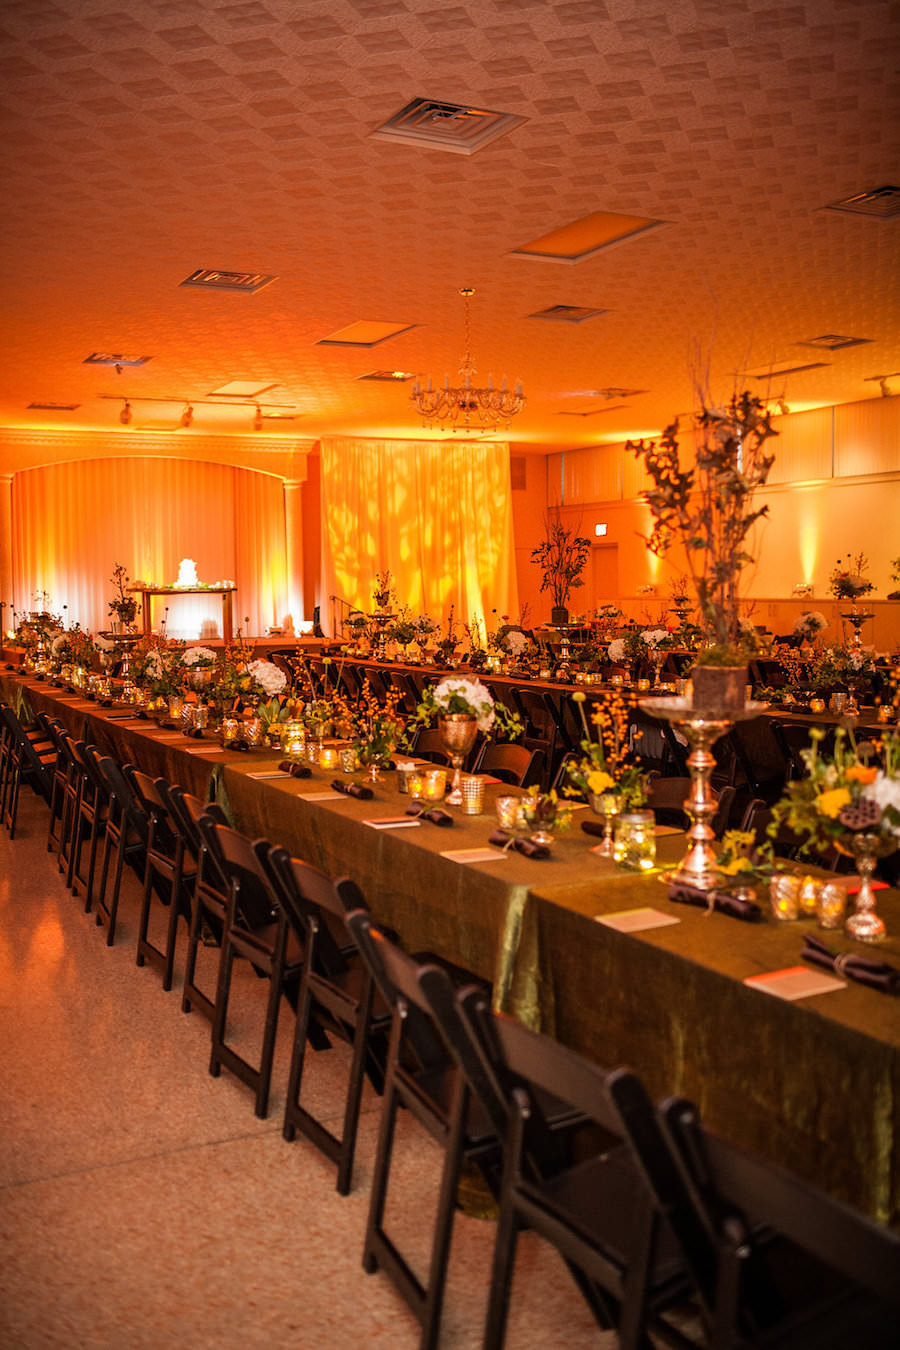 Wedding Reception with Long Feasting Tables with Earth Toned Colors and Orange Uplighting | St. Petersburg Weding Venue Garden Club of St. Petersburg